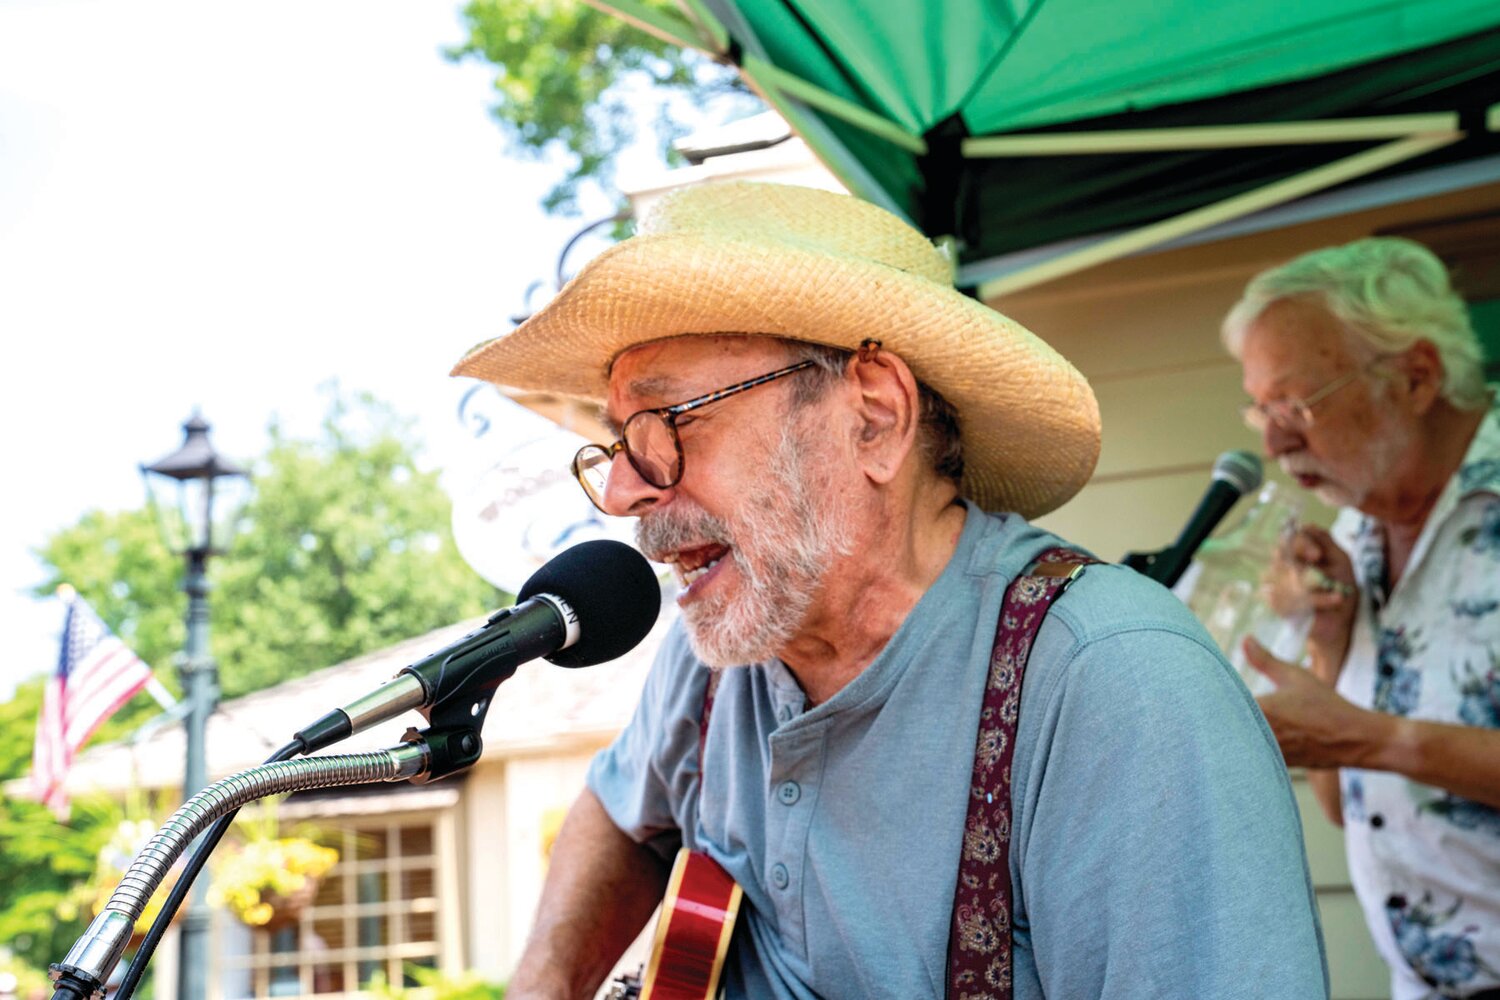 The Back Porch Jugband plays music to liven the atmosphere at Peddler’s Village’s 2023 Peach Festival.